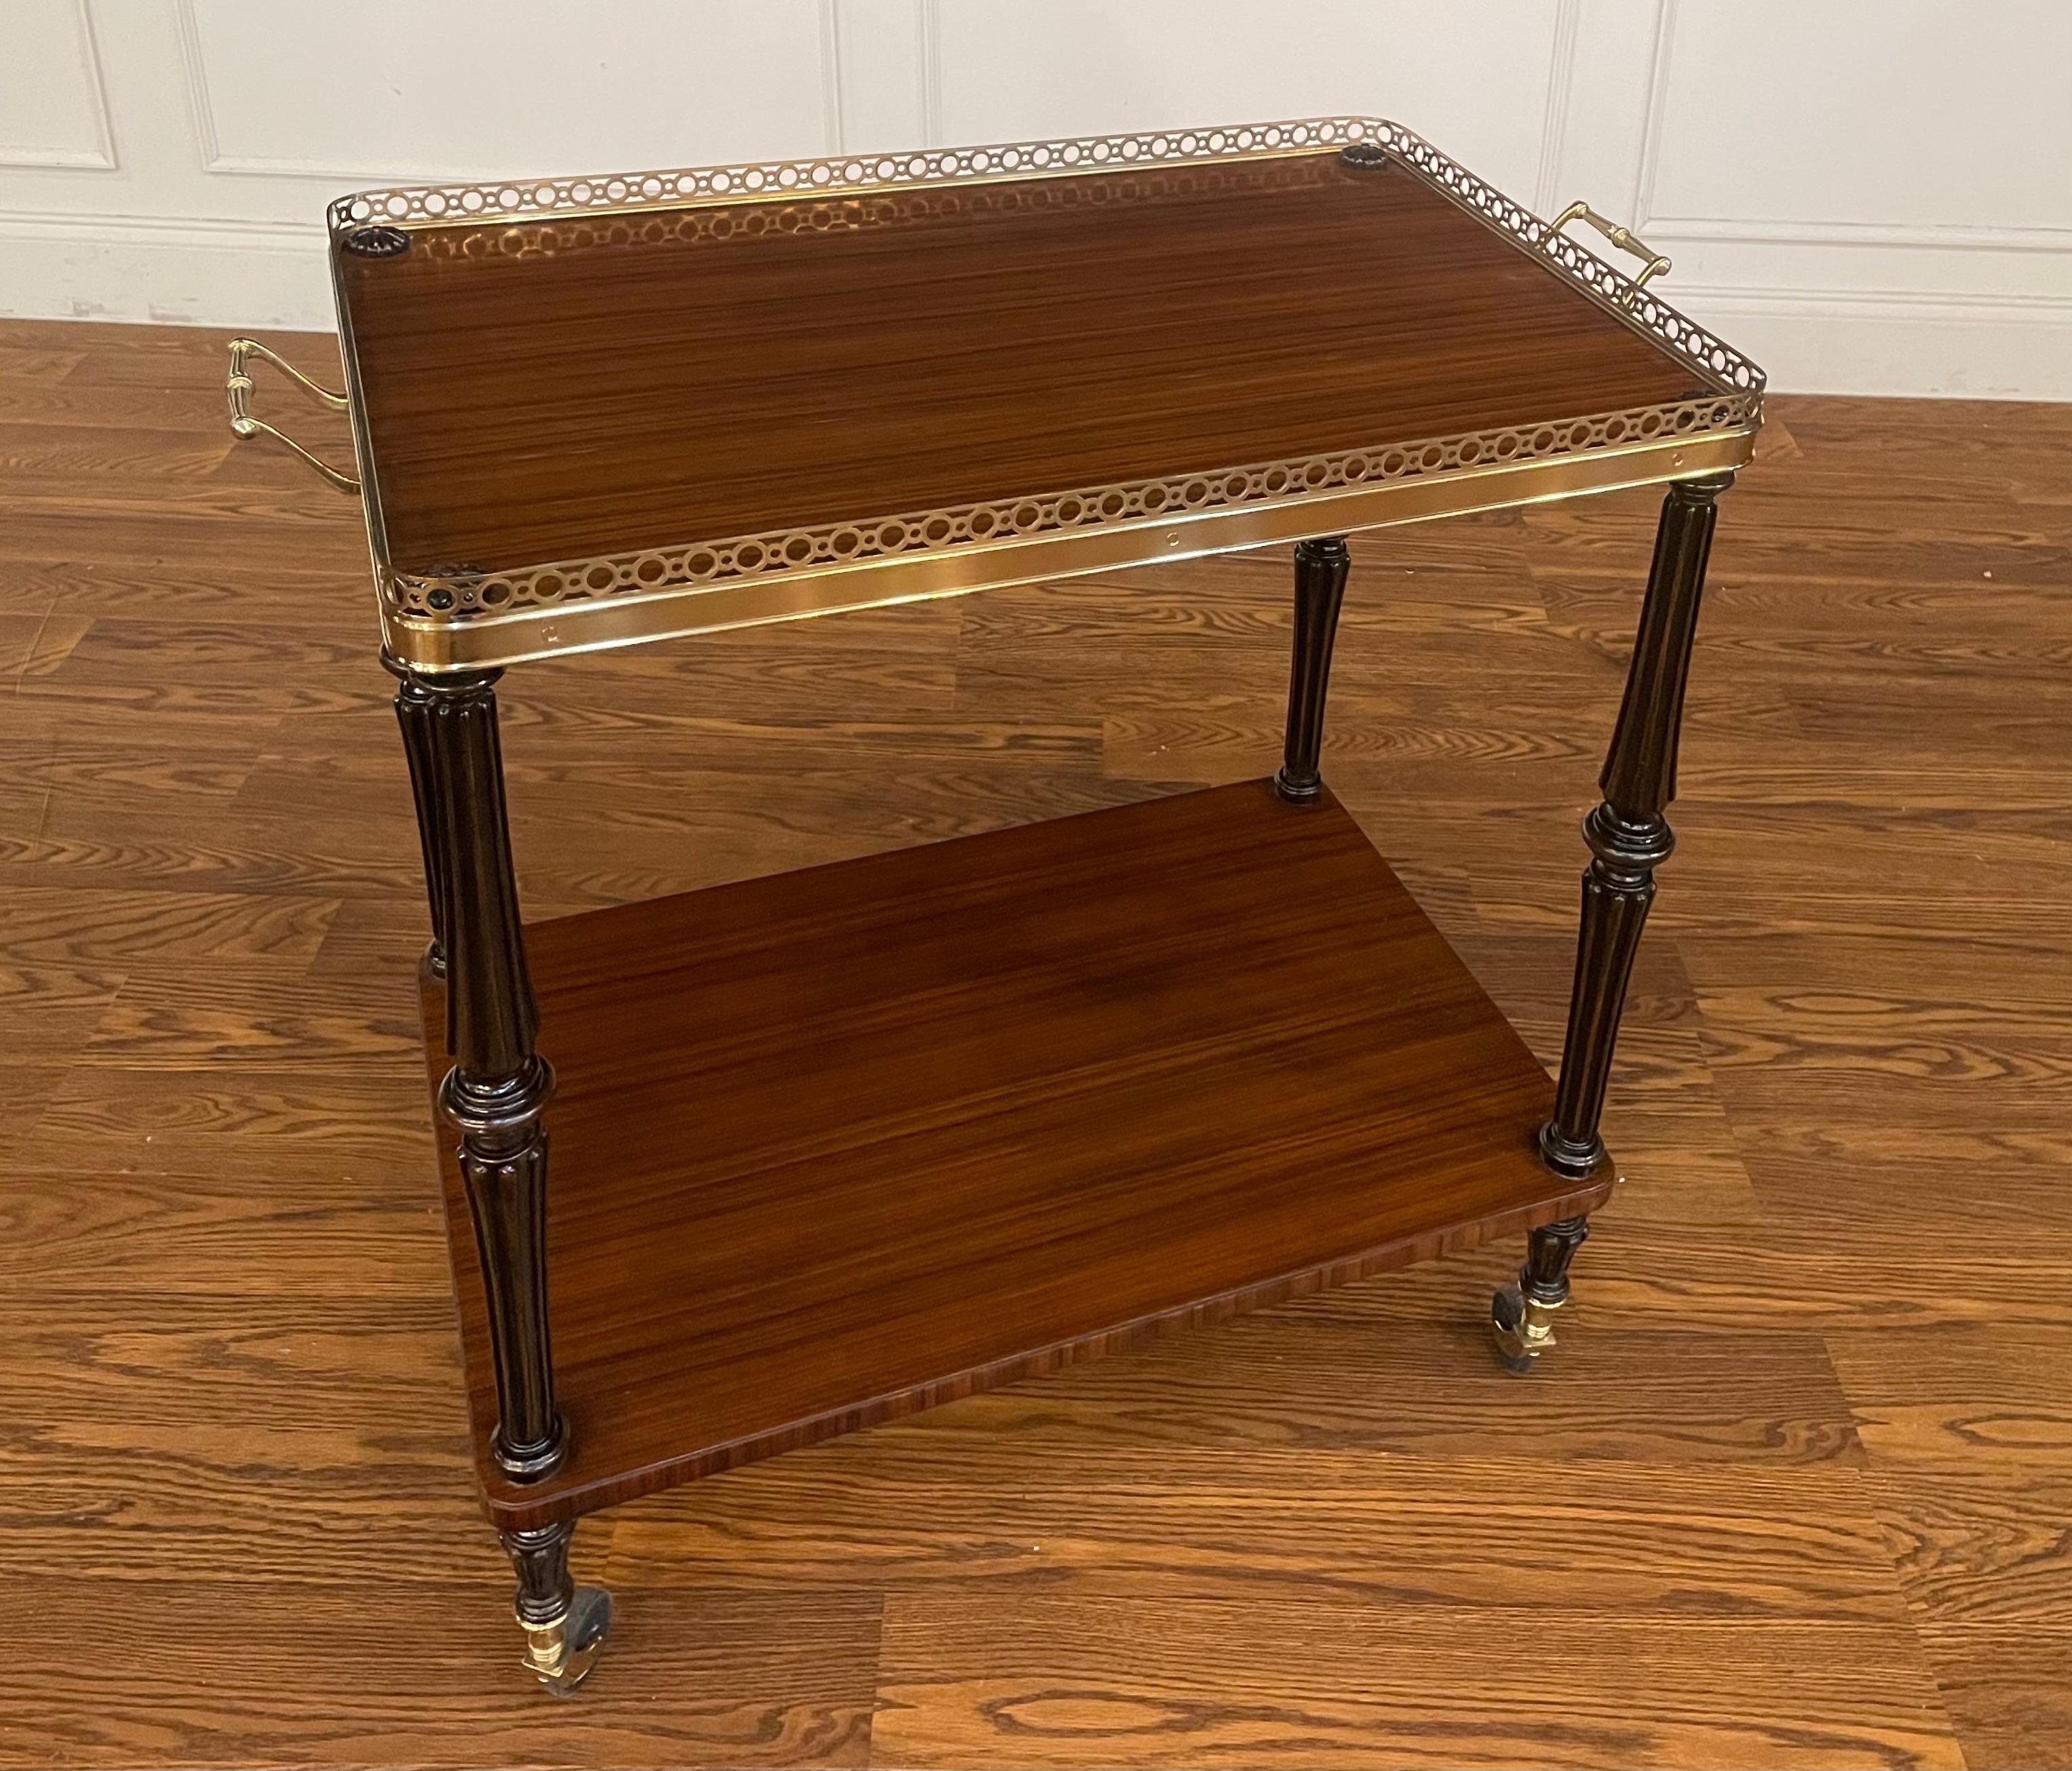 This is a serving cart/trolley by Leighton Hall Furniture.  It features ebonized posts with exotic Pau Ferro wood for the shelves, brass accents and casters for easy movement.  It was used as a showroom sample for approximately one year and is in